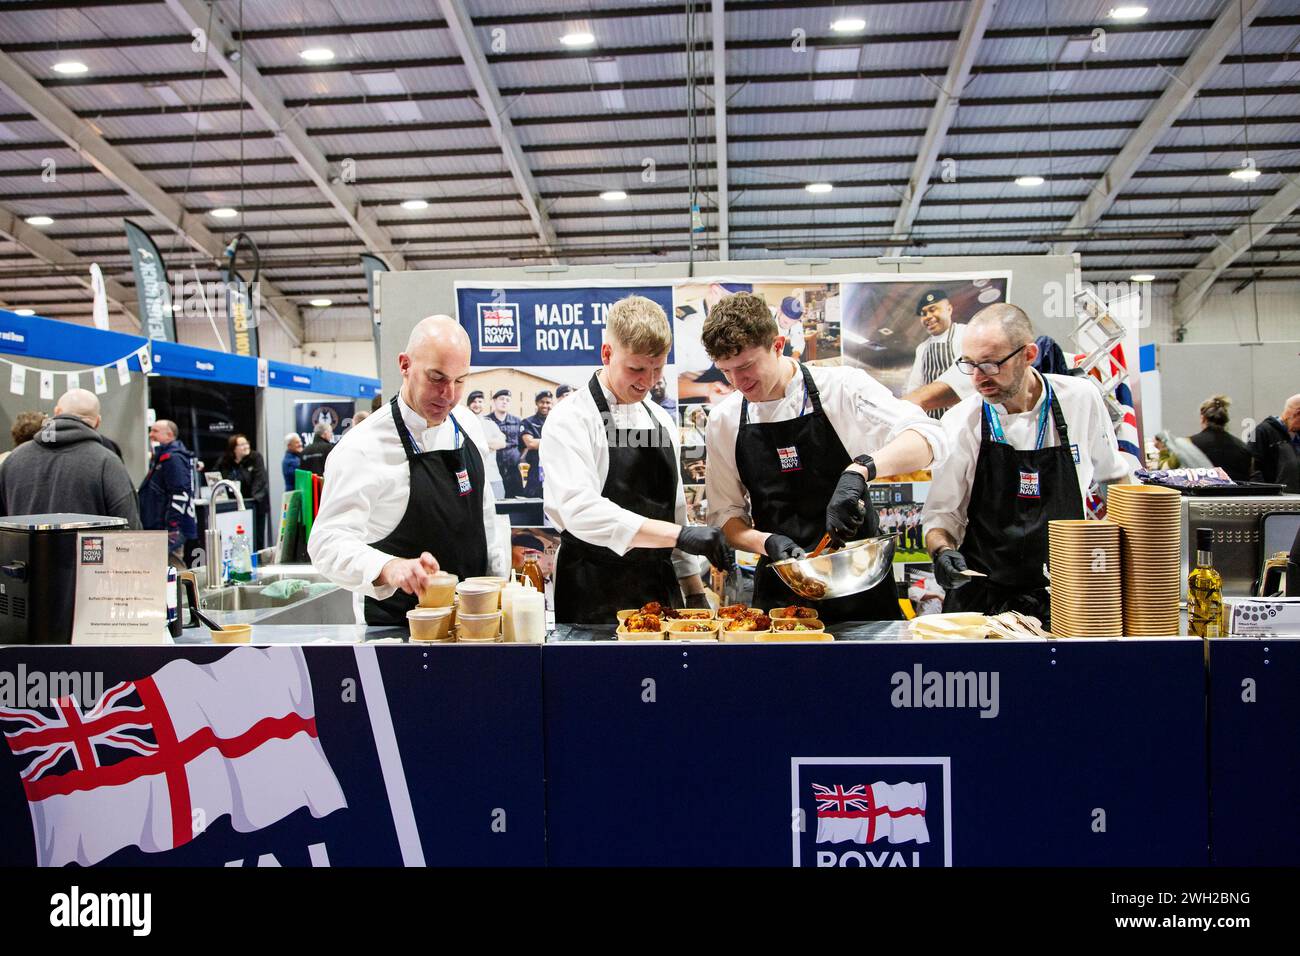 Royal Navy chefs cooking live at the Source food, drink, catering and hospitality tradeshow held at Westpoint Exeter U.K featuring exhibitors and brands on 7th Feb 2024 Stock Photo